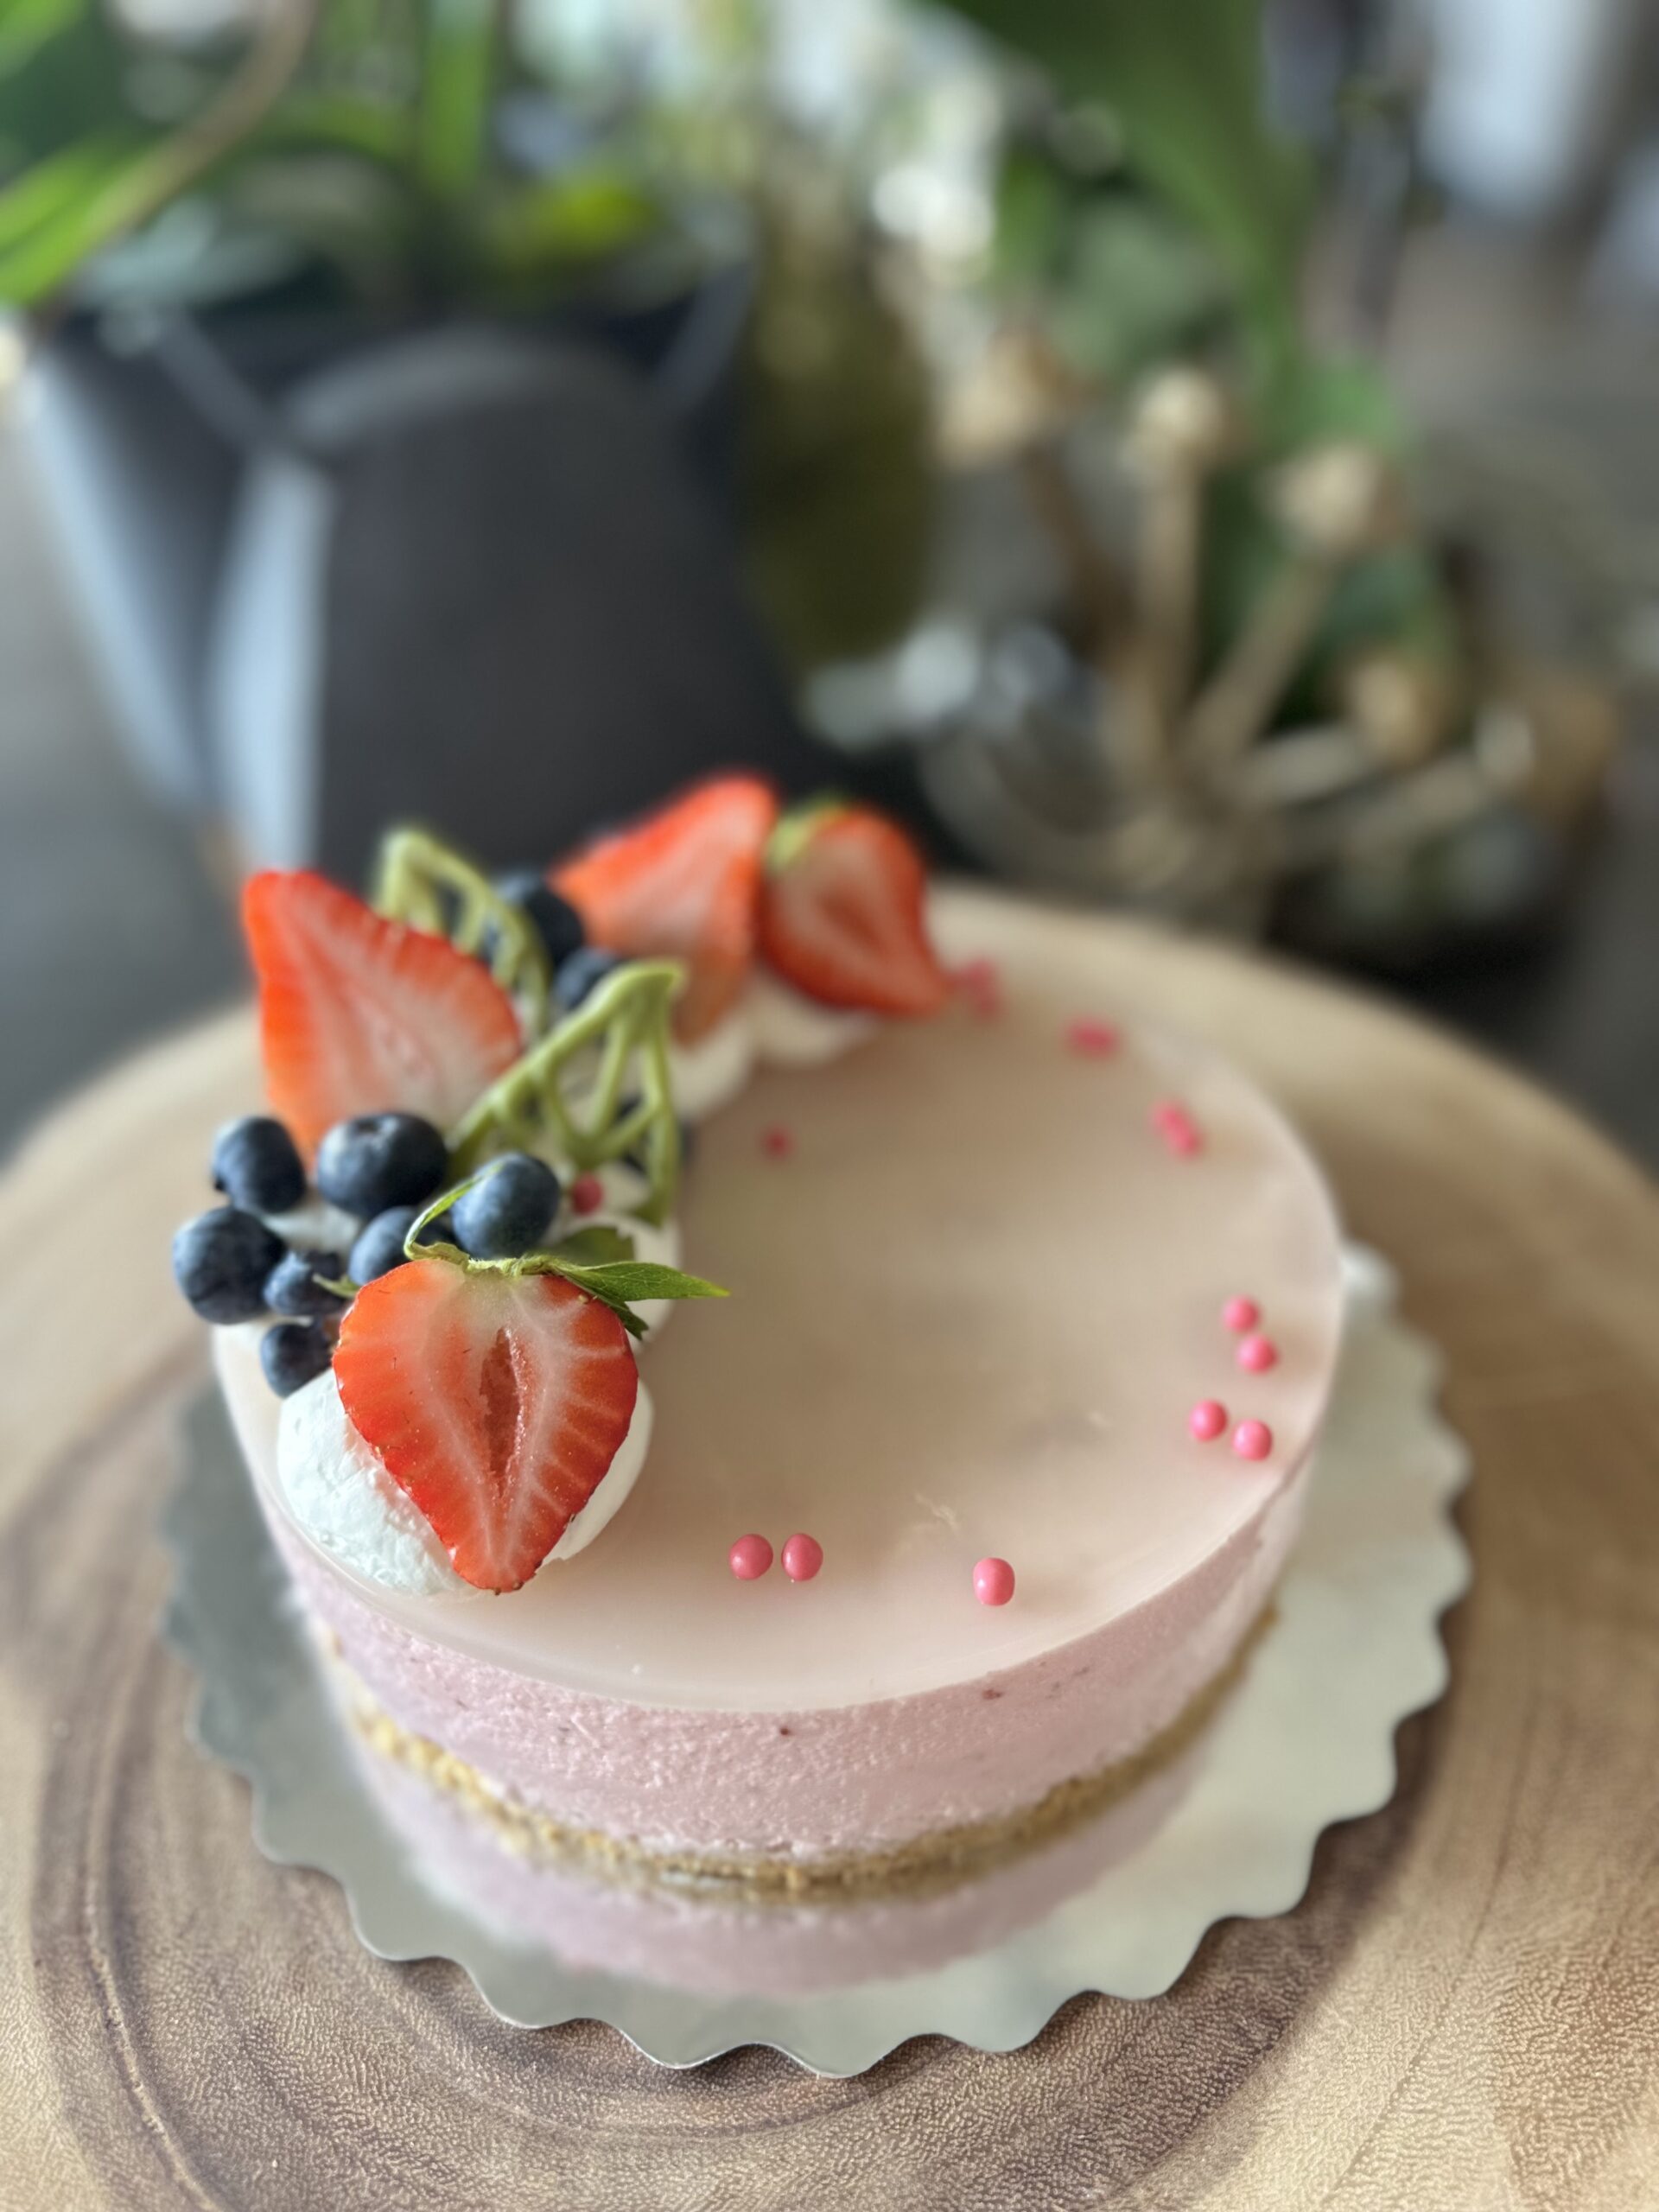 Pistachio Cake With Lychee Mousse | Recipe | Food, Mousse recipes,  Raspberry cheesecake recipe